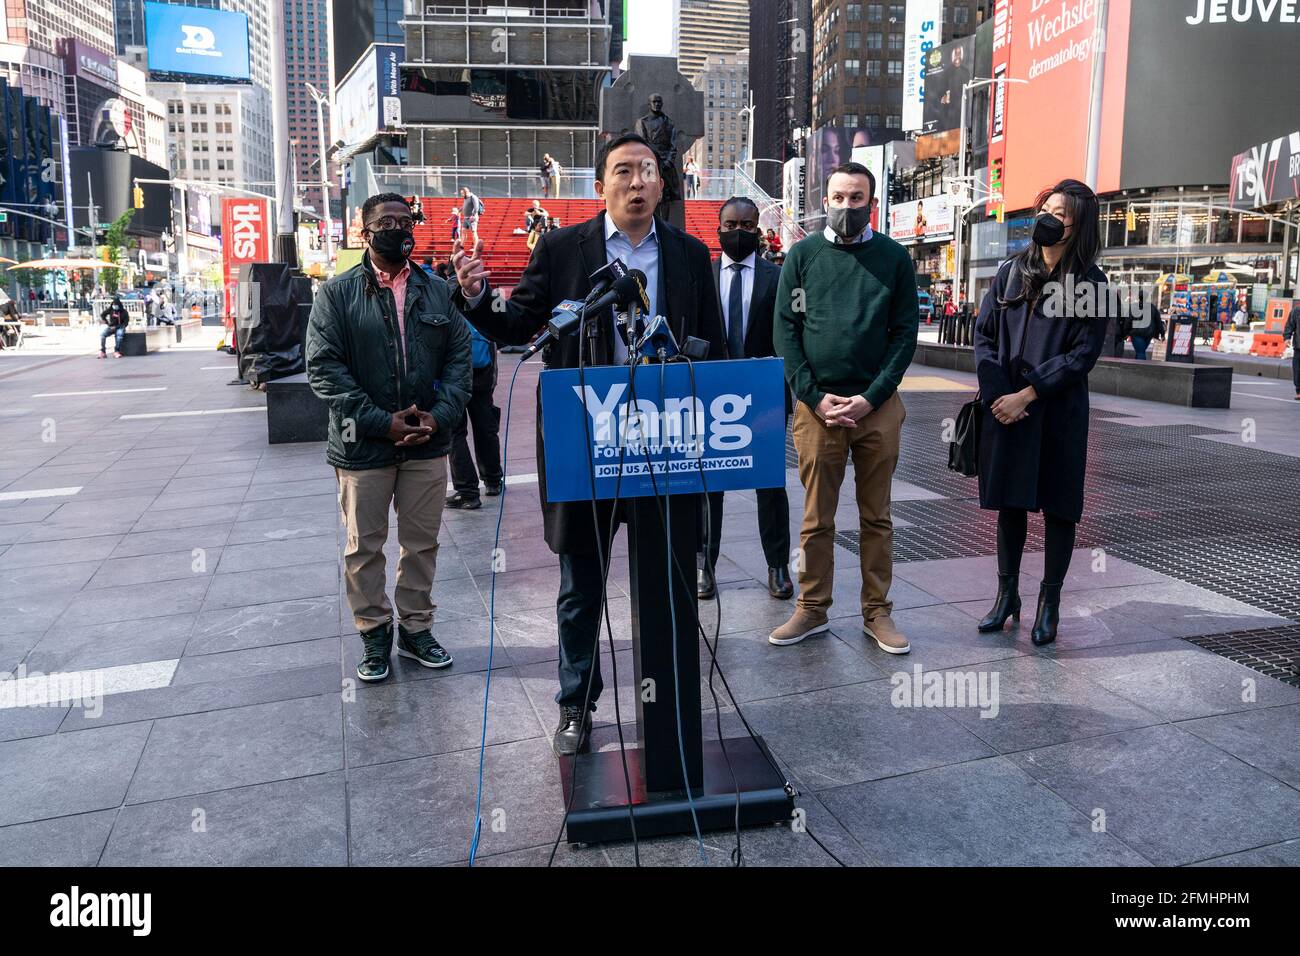 New York, United States. 09th May, 2021. Mayoral candidate Andrew Yang holds a press conference to address gun violence and recent shootings on Times Square in New York on May 9, 2021. Andrew Yang addressed recent shooting of 3 innocent bystanders on Times Square and increase of gun violence and other types of crime in the city. As Yang was speaking people were celebrating Mother's Day around Times Square. (Photo by Lev Radin/Sipa USA) Credit: Sipa USA/Alamy Live News Stock Photo